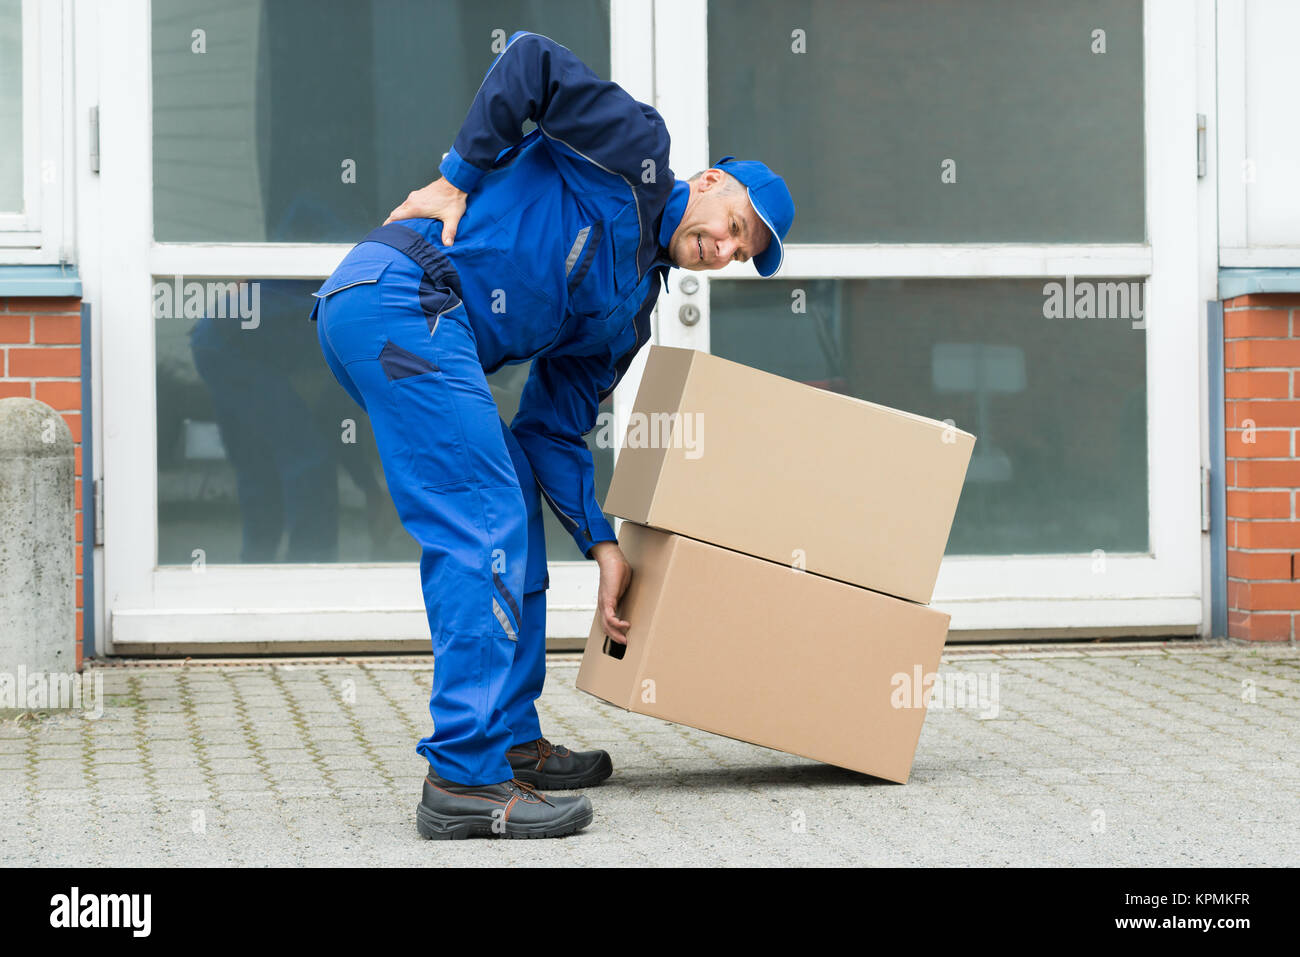 Delivery Man Suffering From Backpain Stock Photo